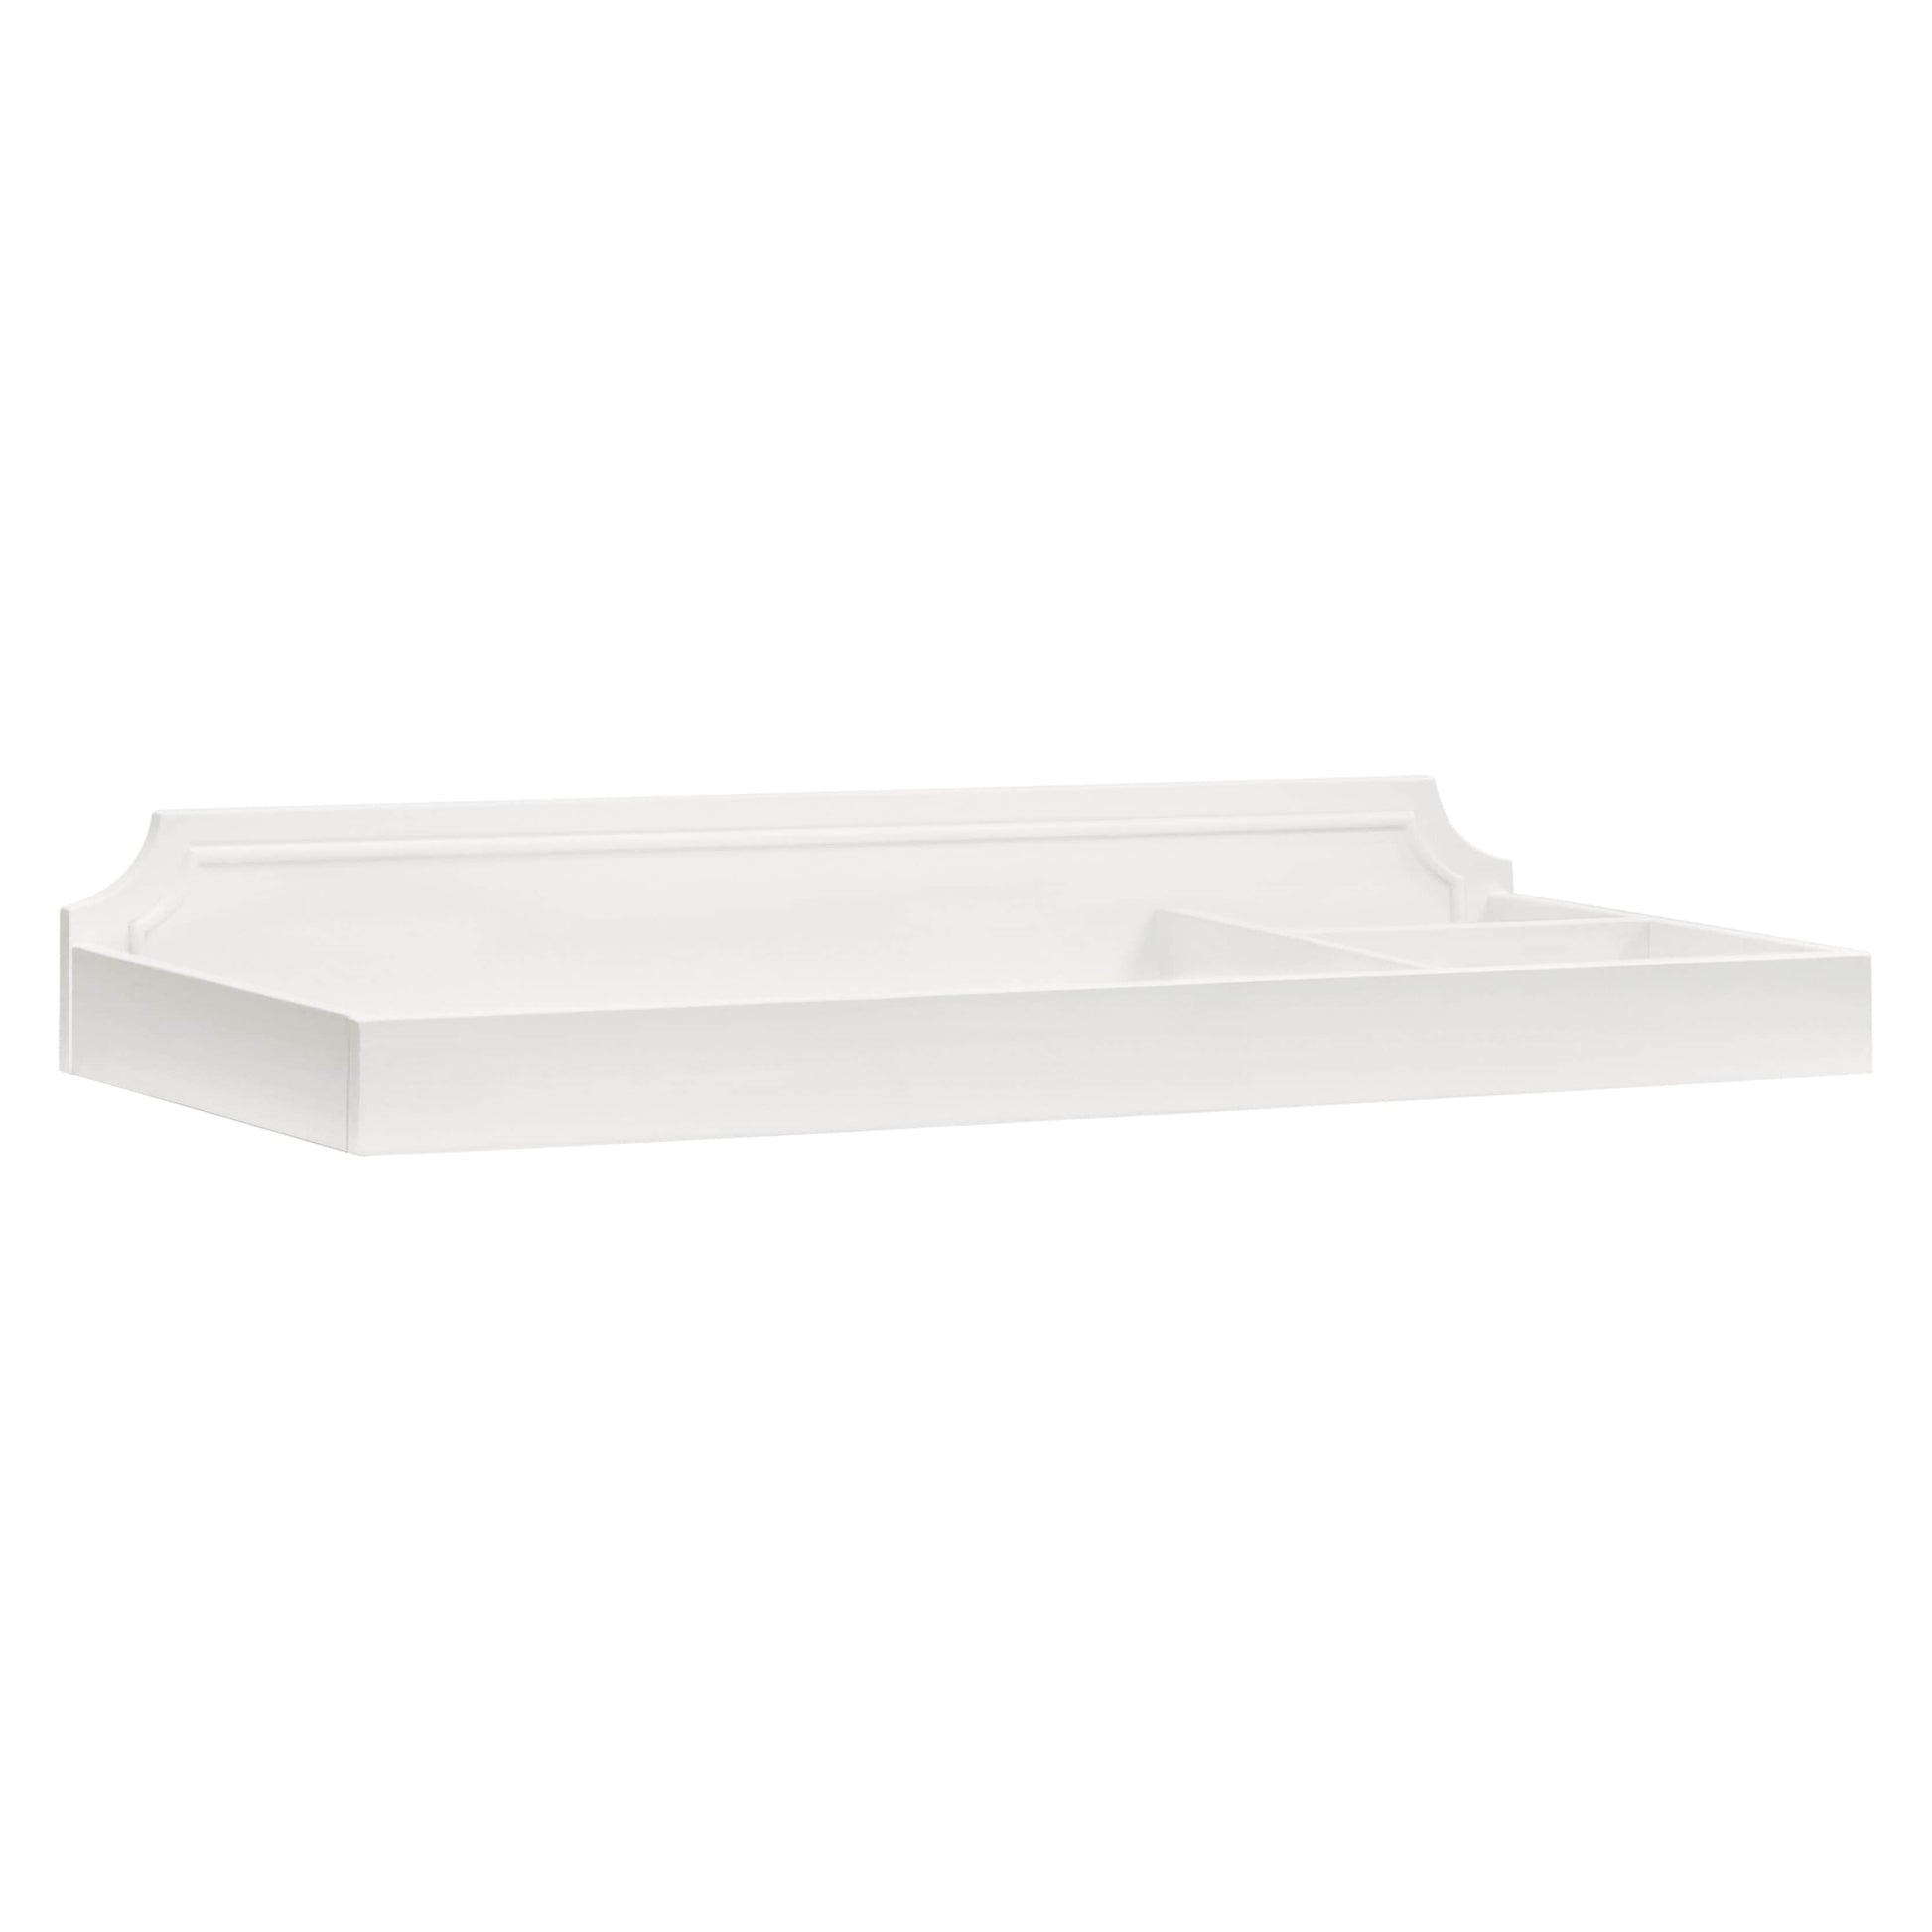 M10719RW,Emma Regency Removable Changing Tray in Warm White